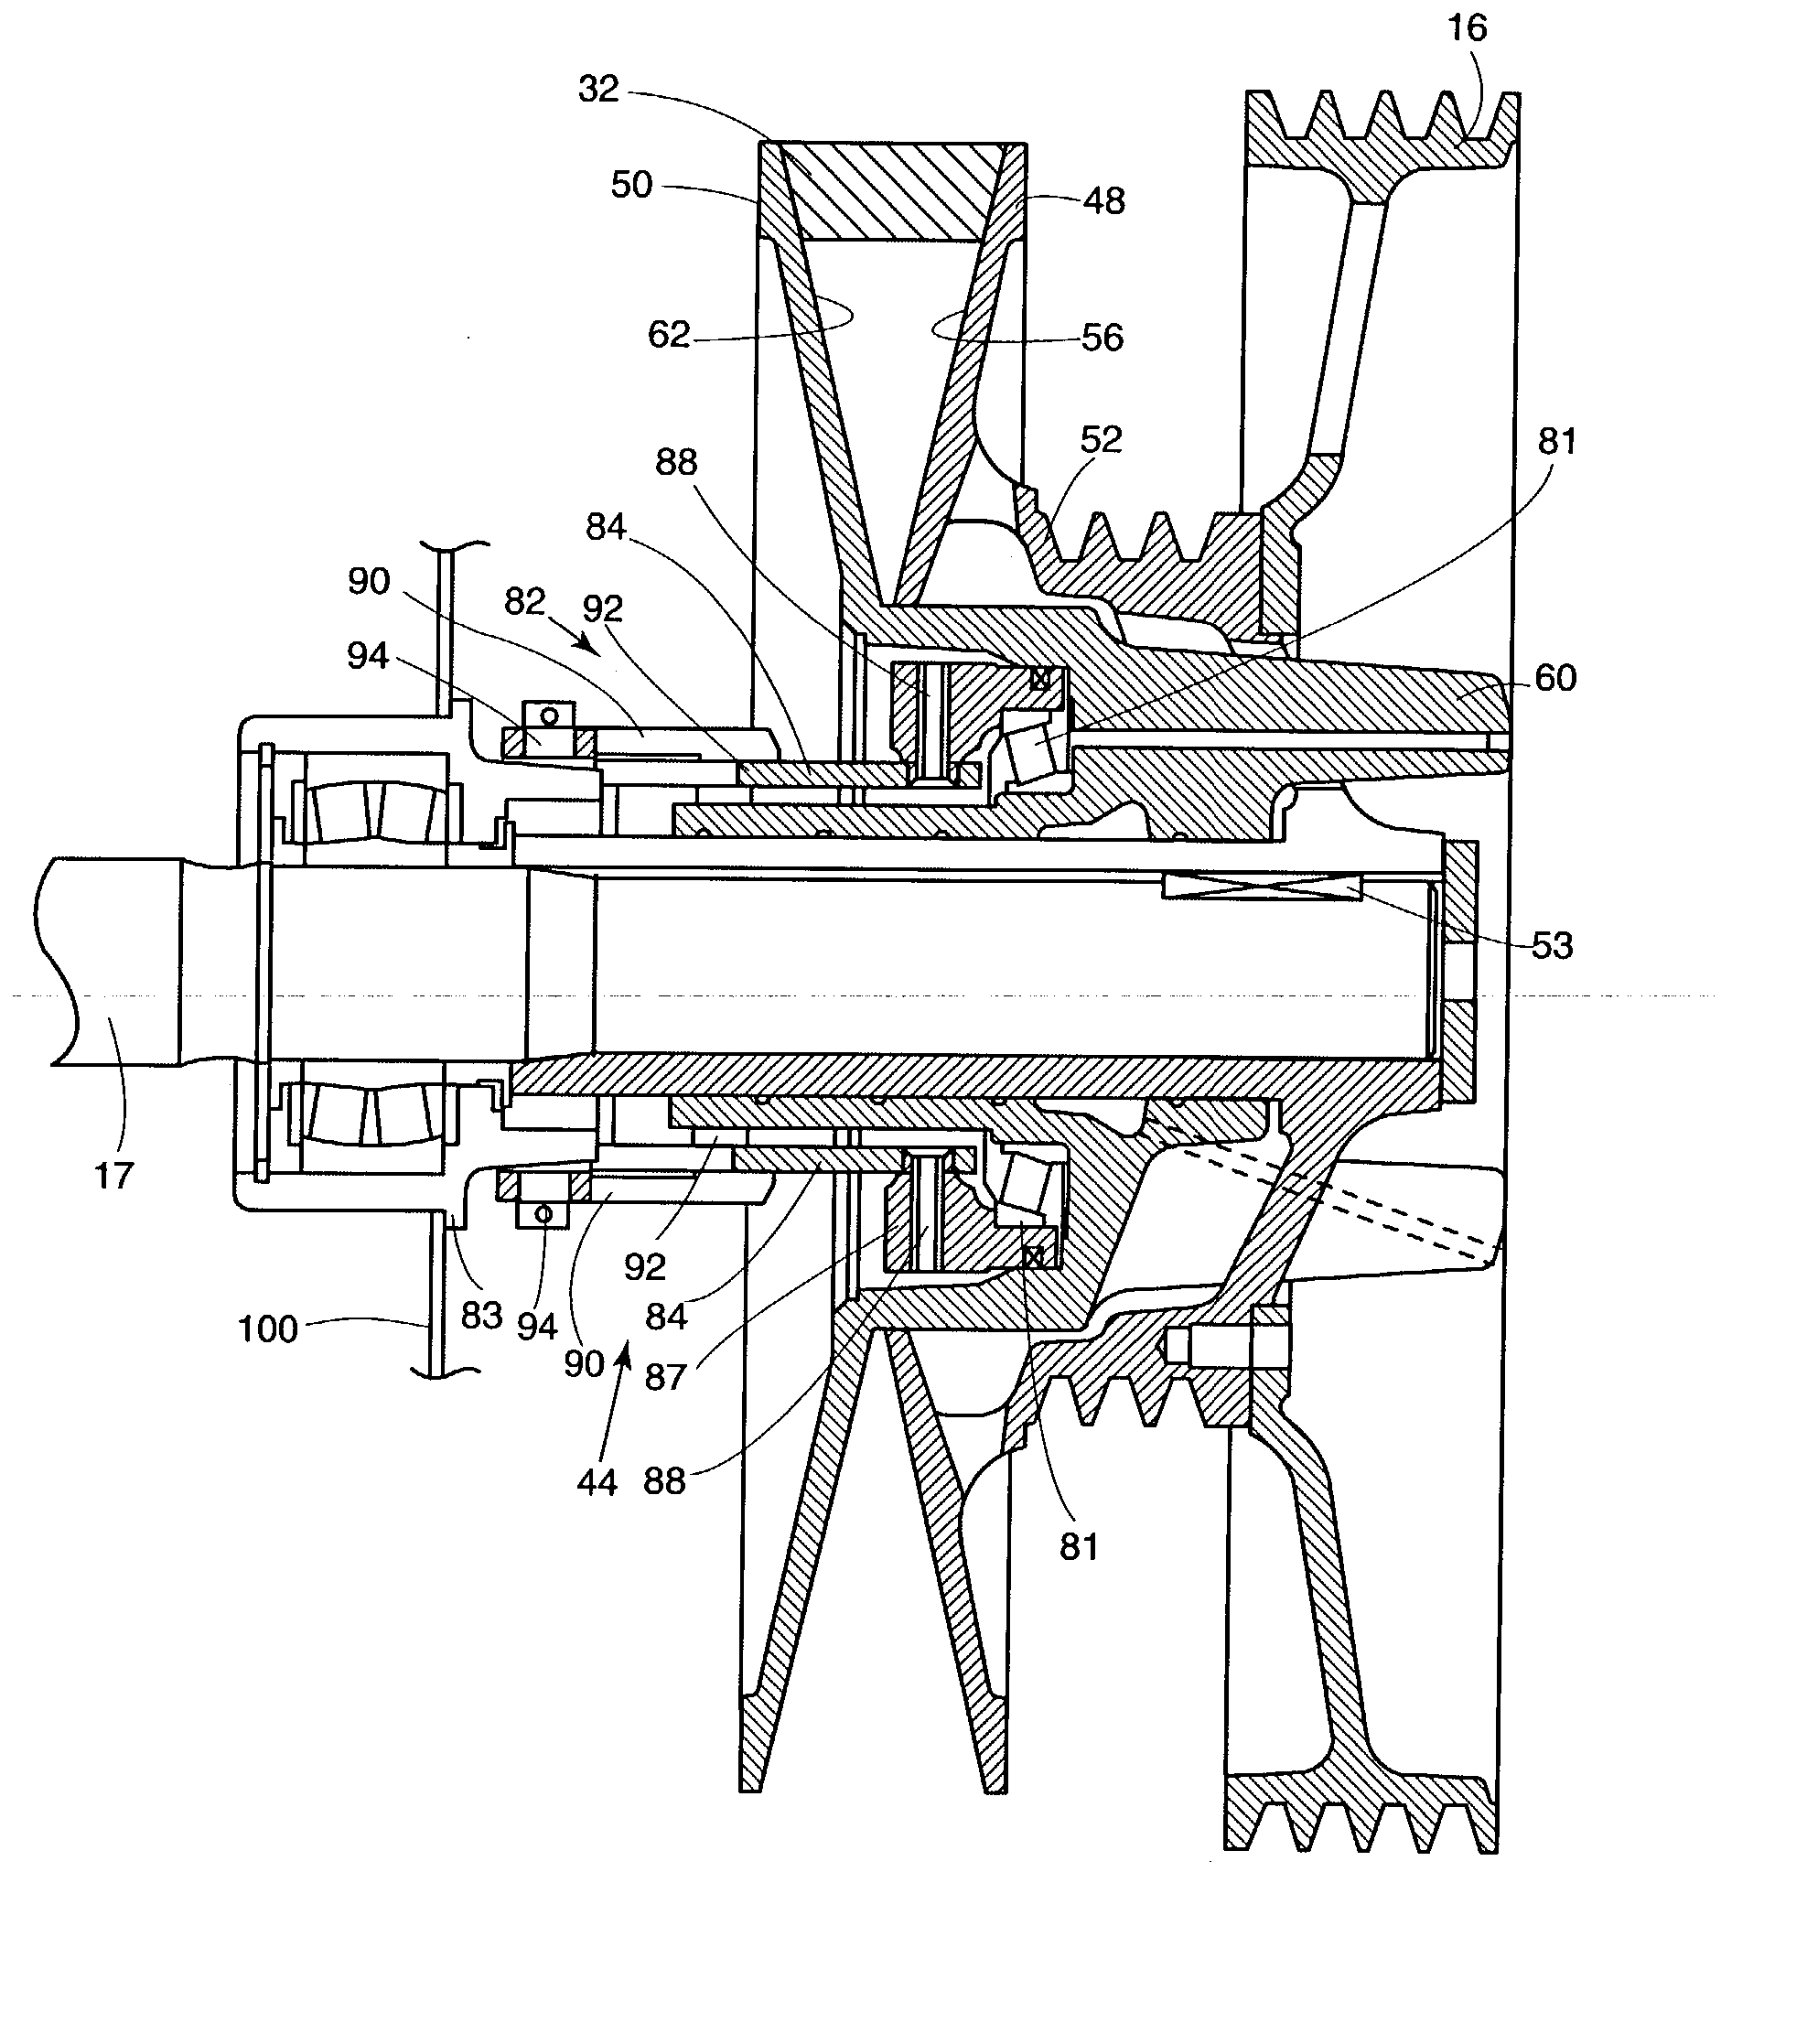 Utility machinery and associated control arrangements